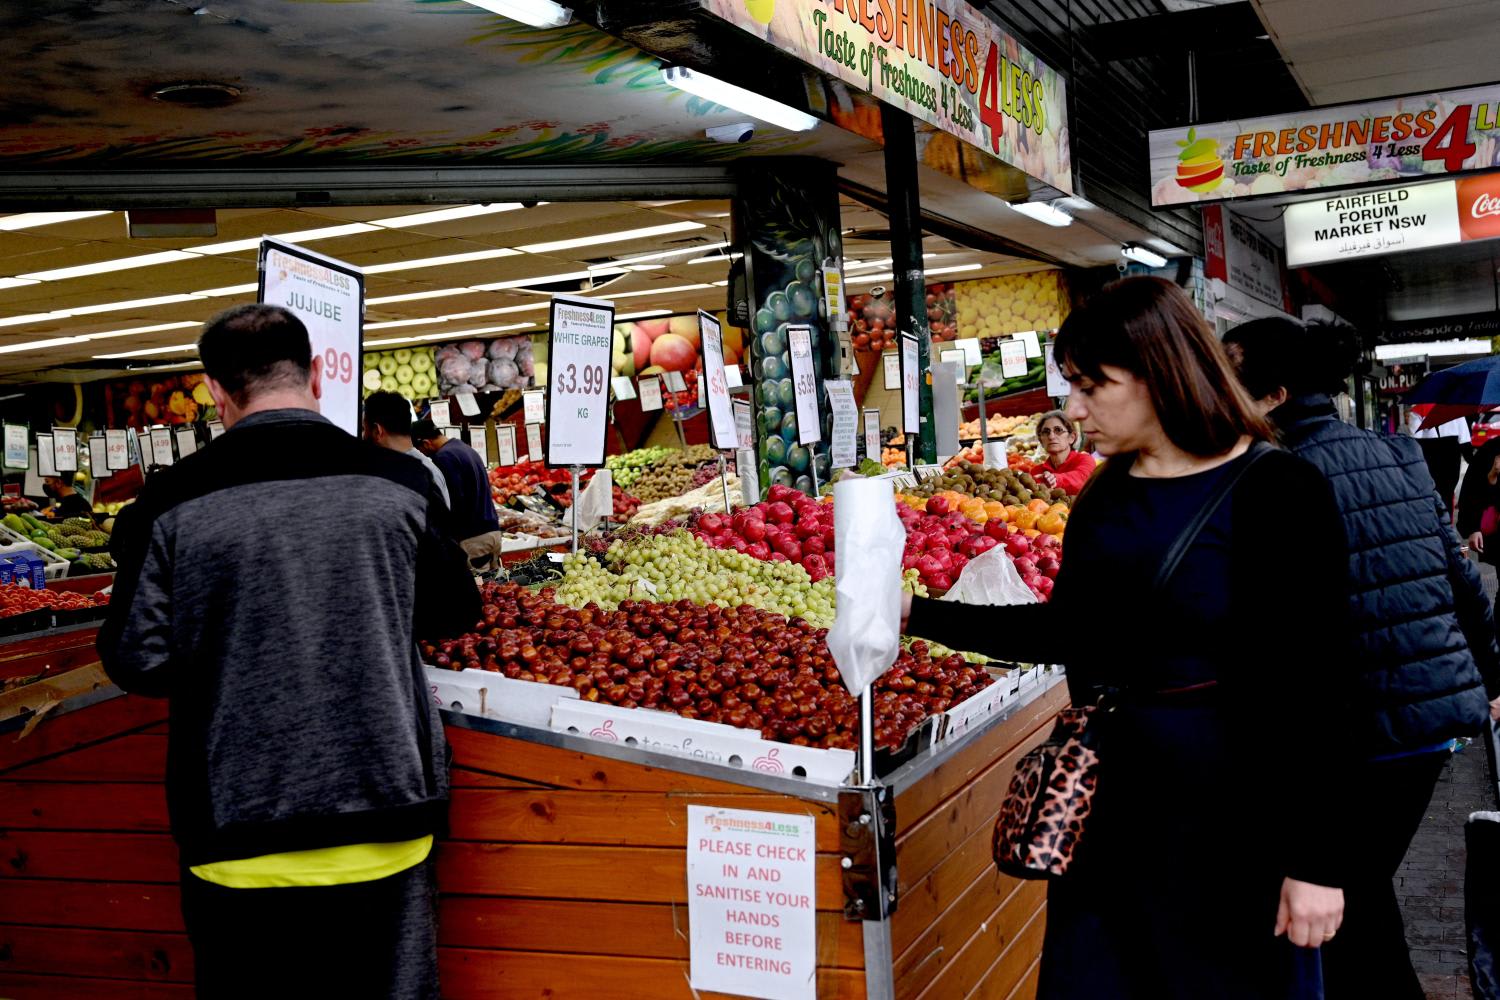 Australia's annual inflation rate hit 5.1 percent in the March quarter, the highest recorded since 2001.